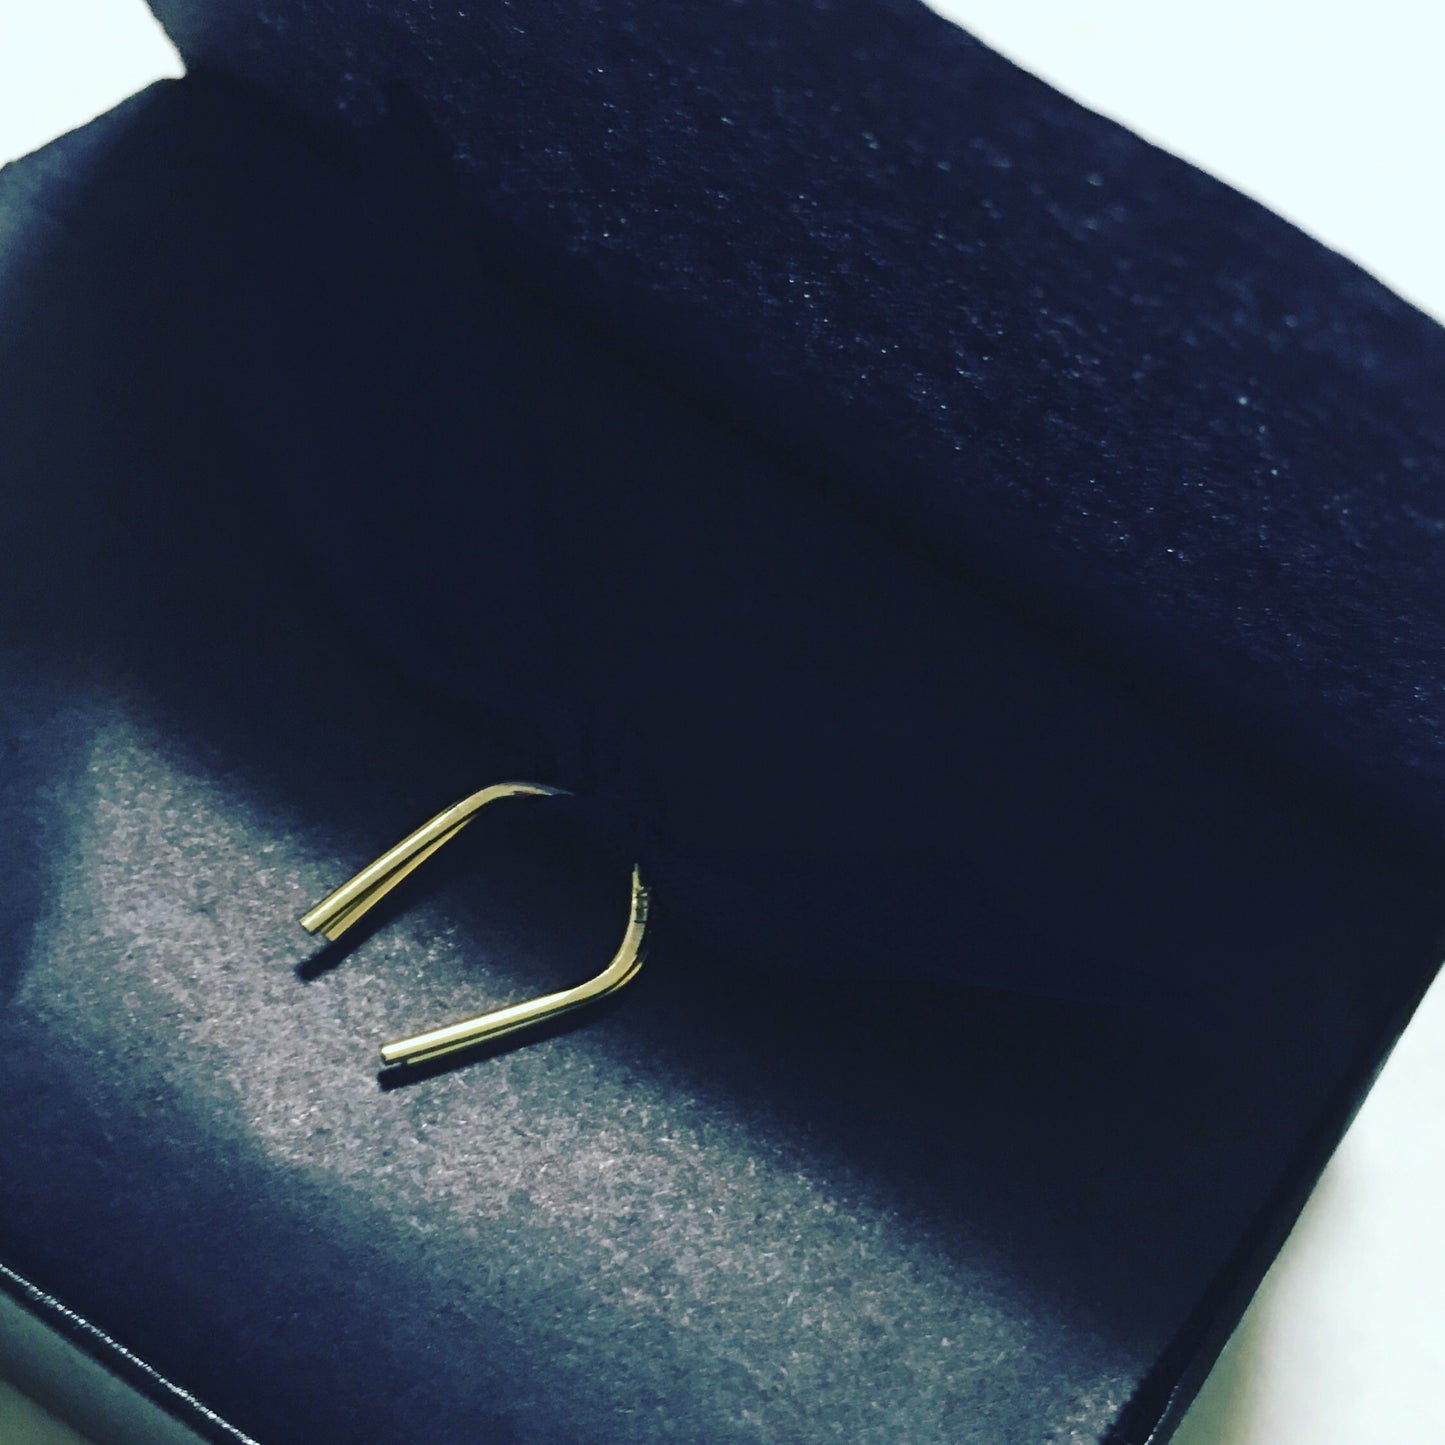 14k gold brave arc earrings, single or pair - andJules Jewelry